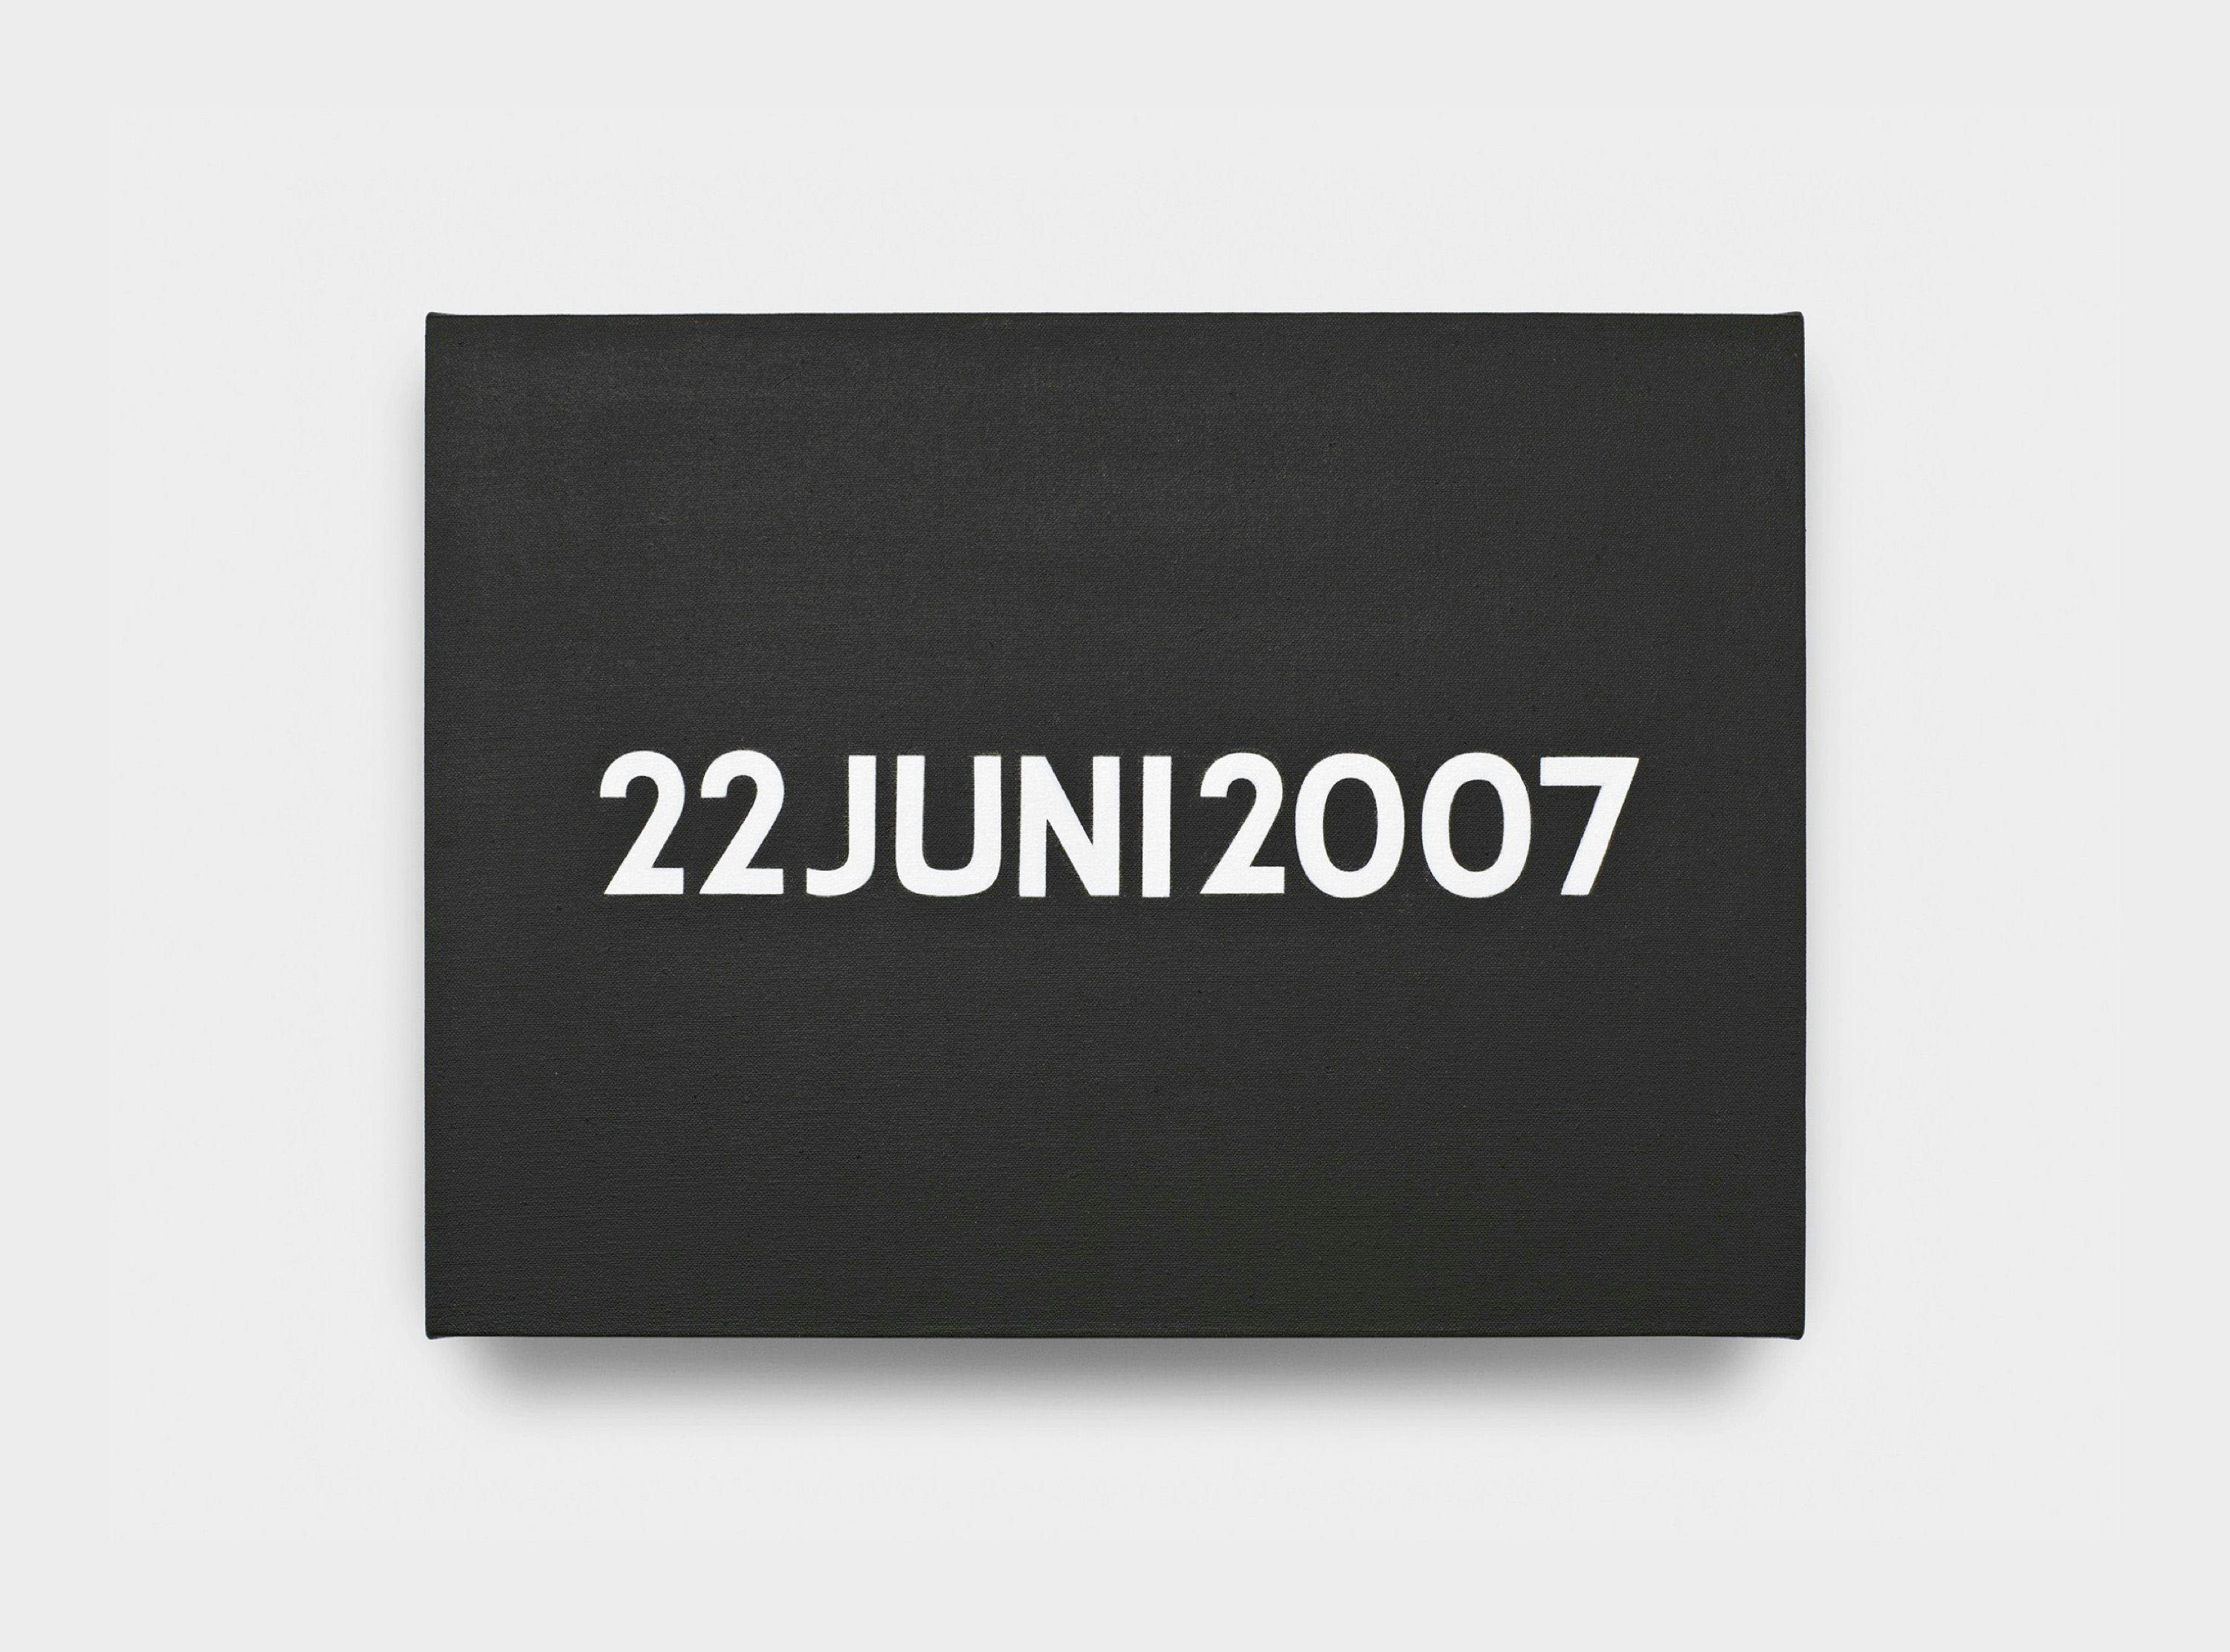 A painting by On Kawara, titled 22 JUNI 2007, dated 2007.